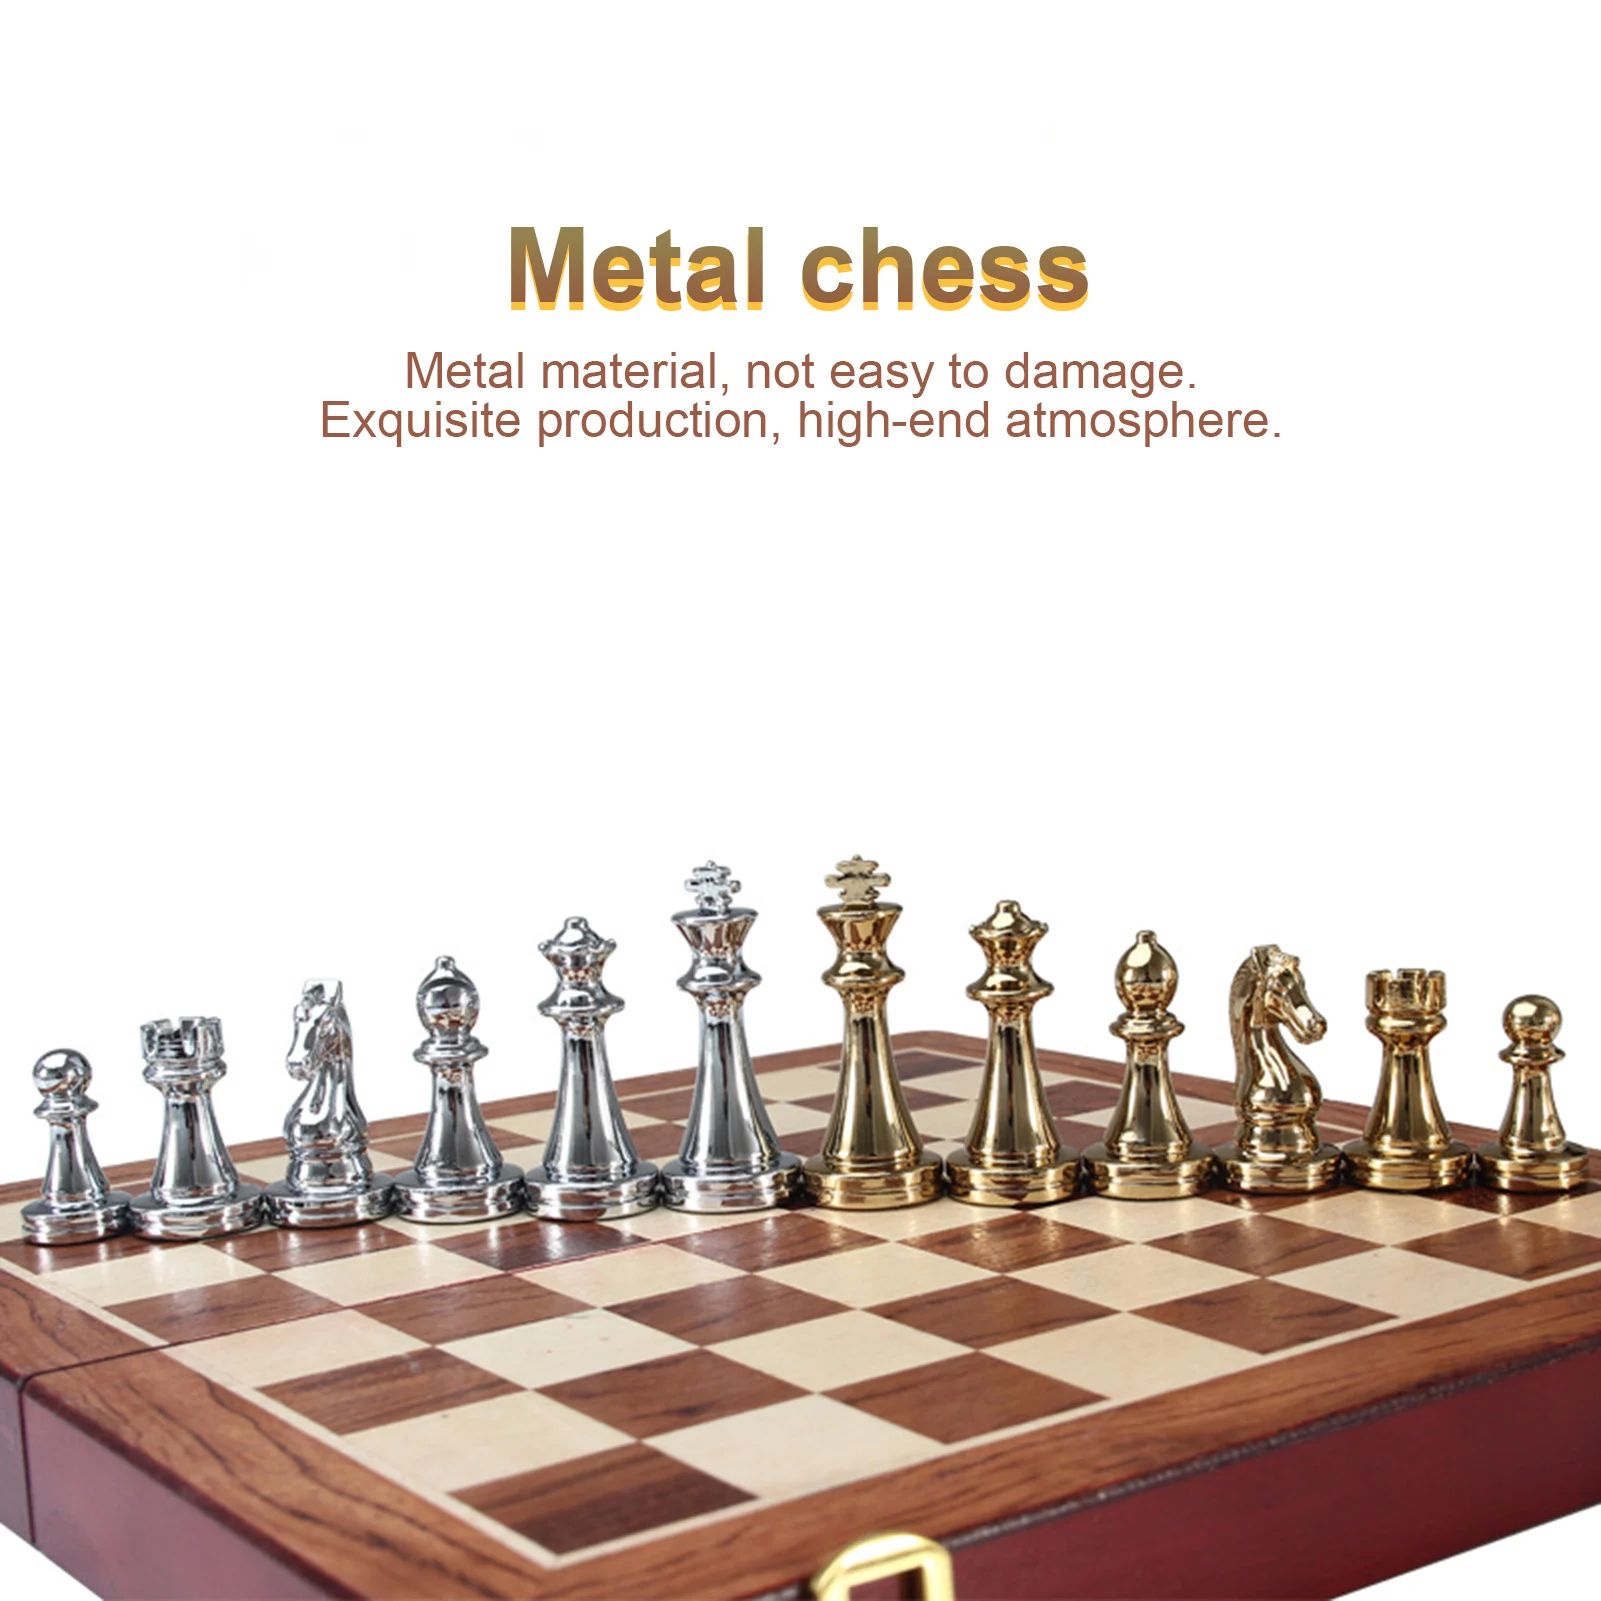 Metal Glossy Golden & Silver Bronze Chess Pieces Solid Wooden Folding Chess Board High Quality Professional Chess Games Set 4